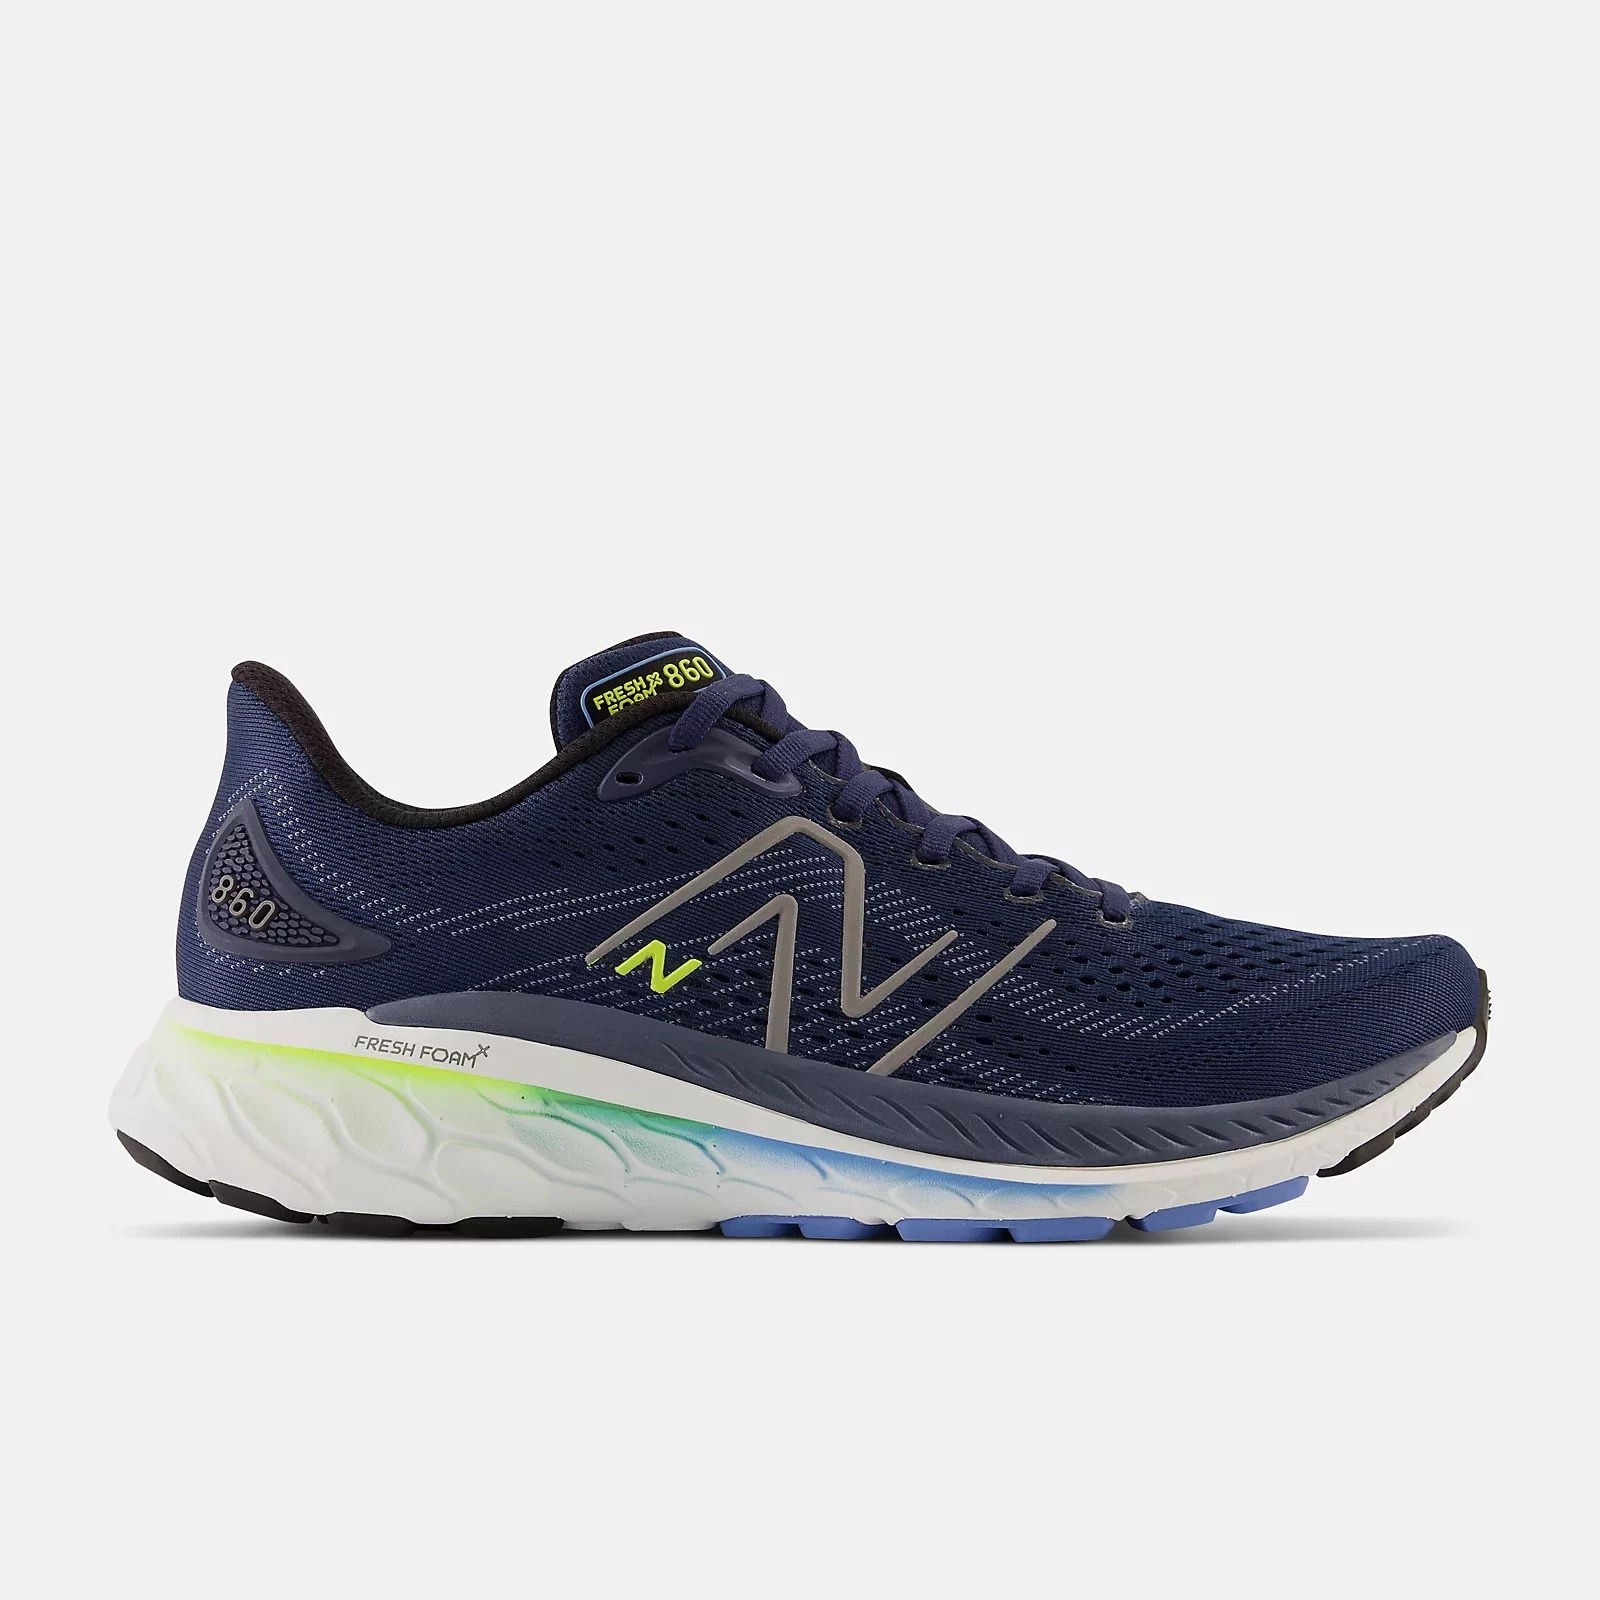 New Balance Fresh Foam X 860, best sneakers for ankle support